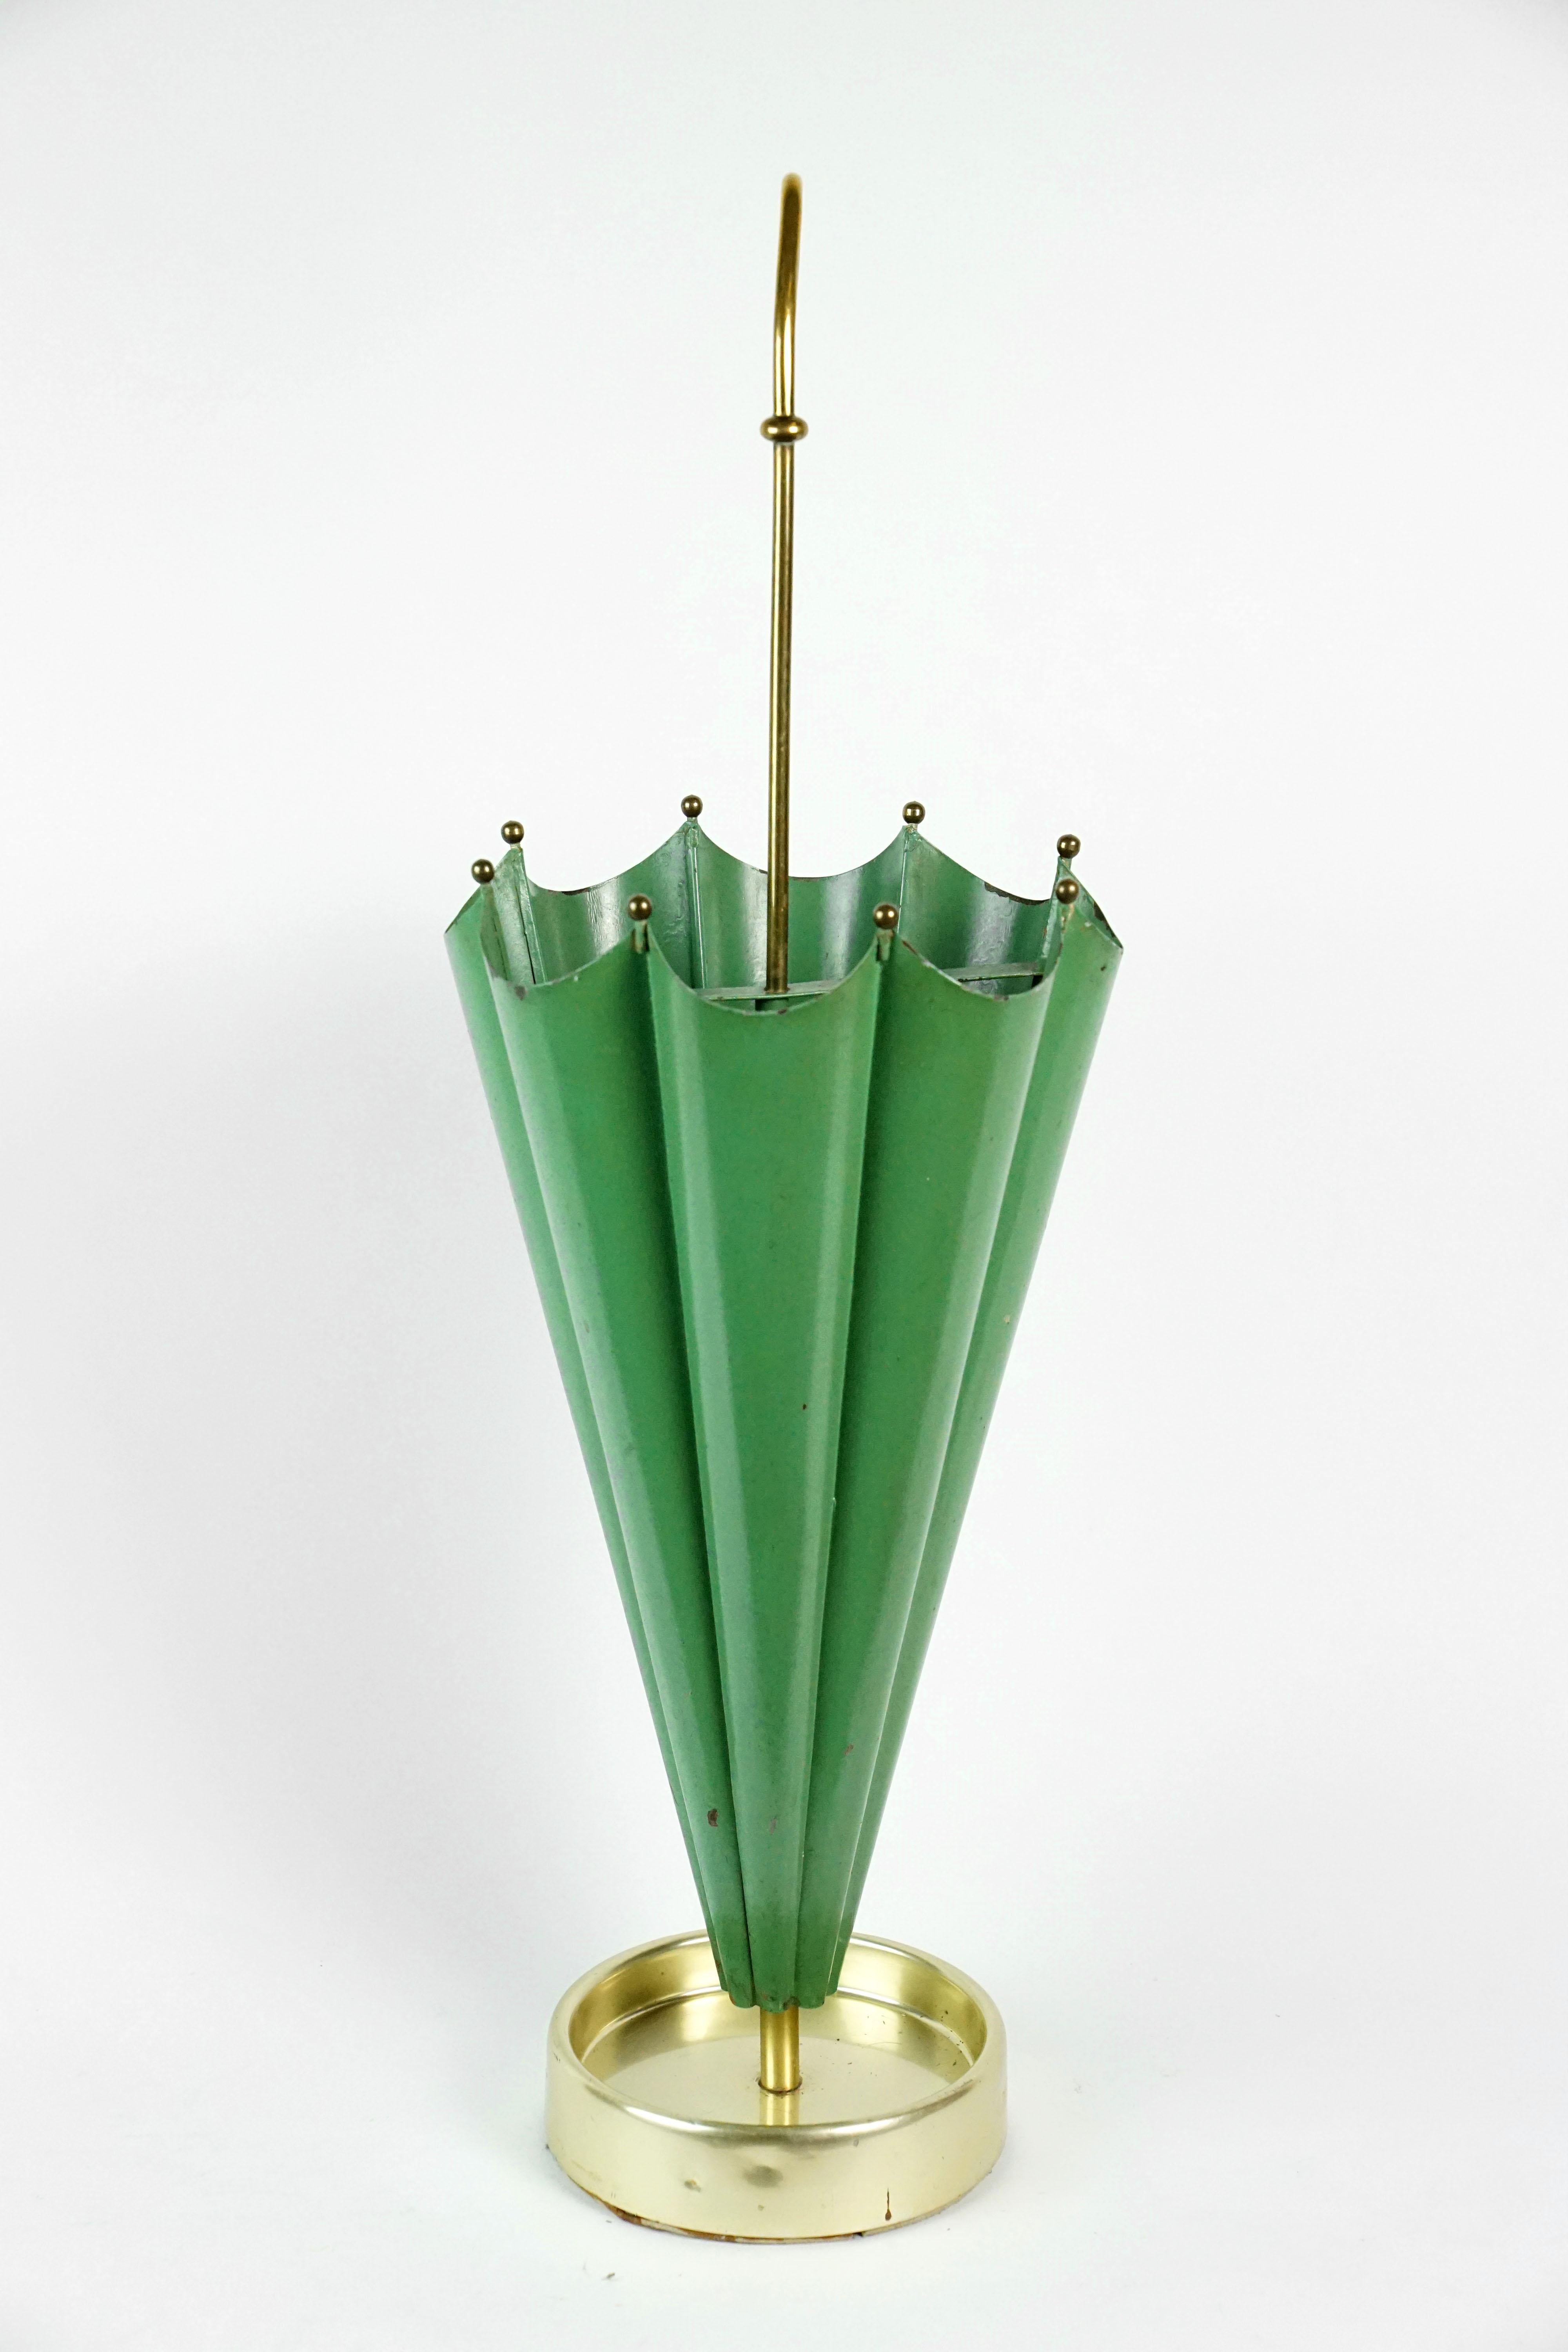 Mid-Century Modern umbrella stand, brass colored, shaped like an umbrella, 1950s Italy.
Green with brass colored base and handle. Wonderful design!
 